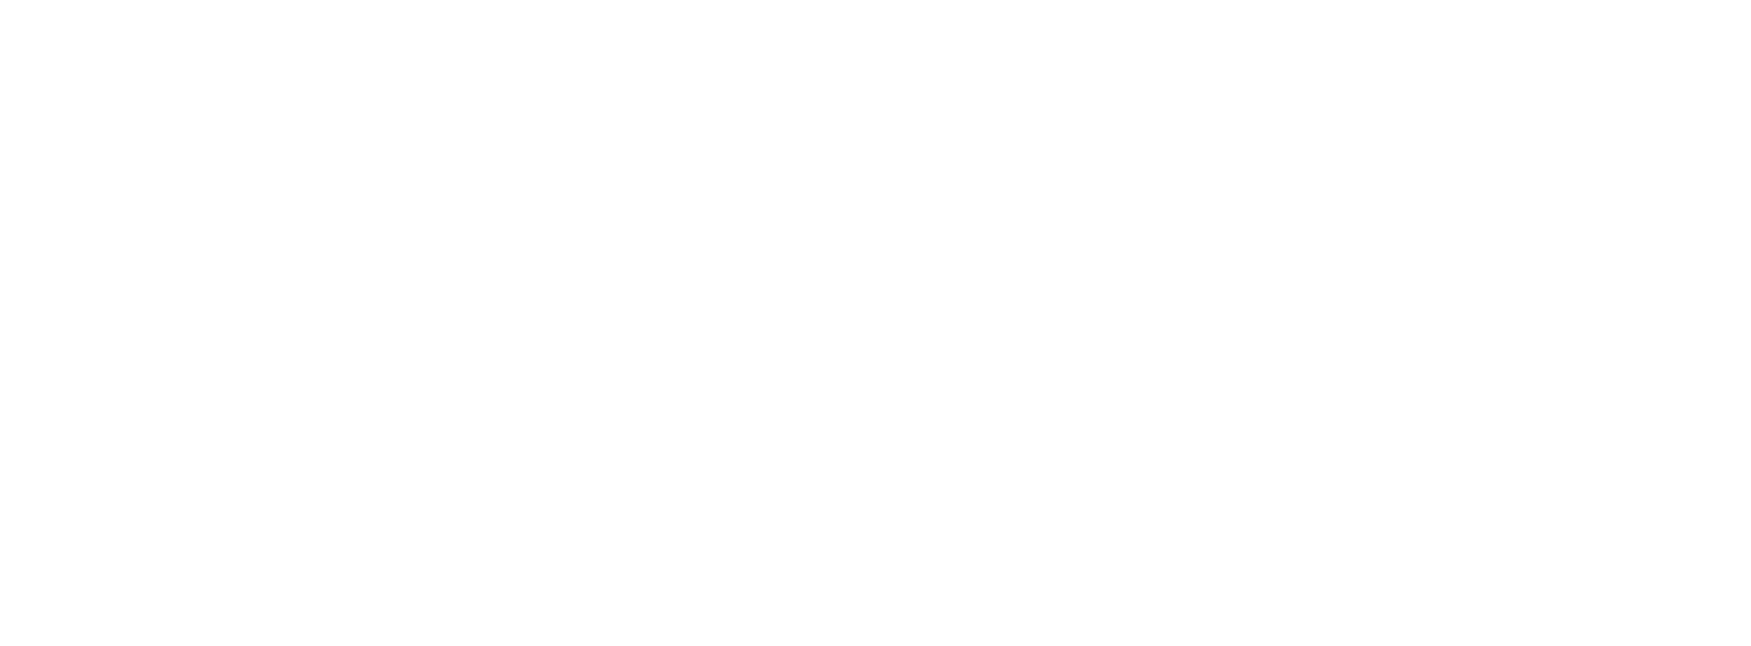 University of Toronto - Admitted Transfer Students